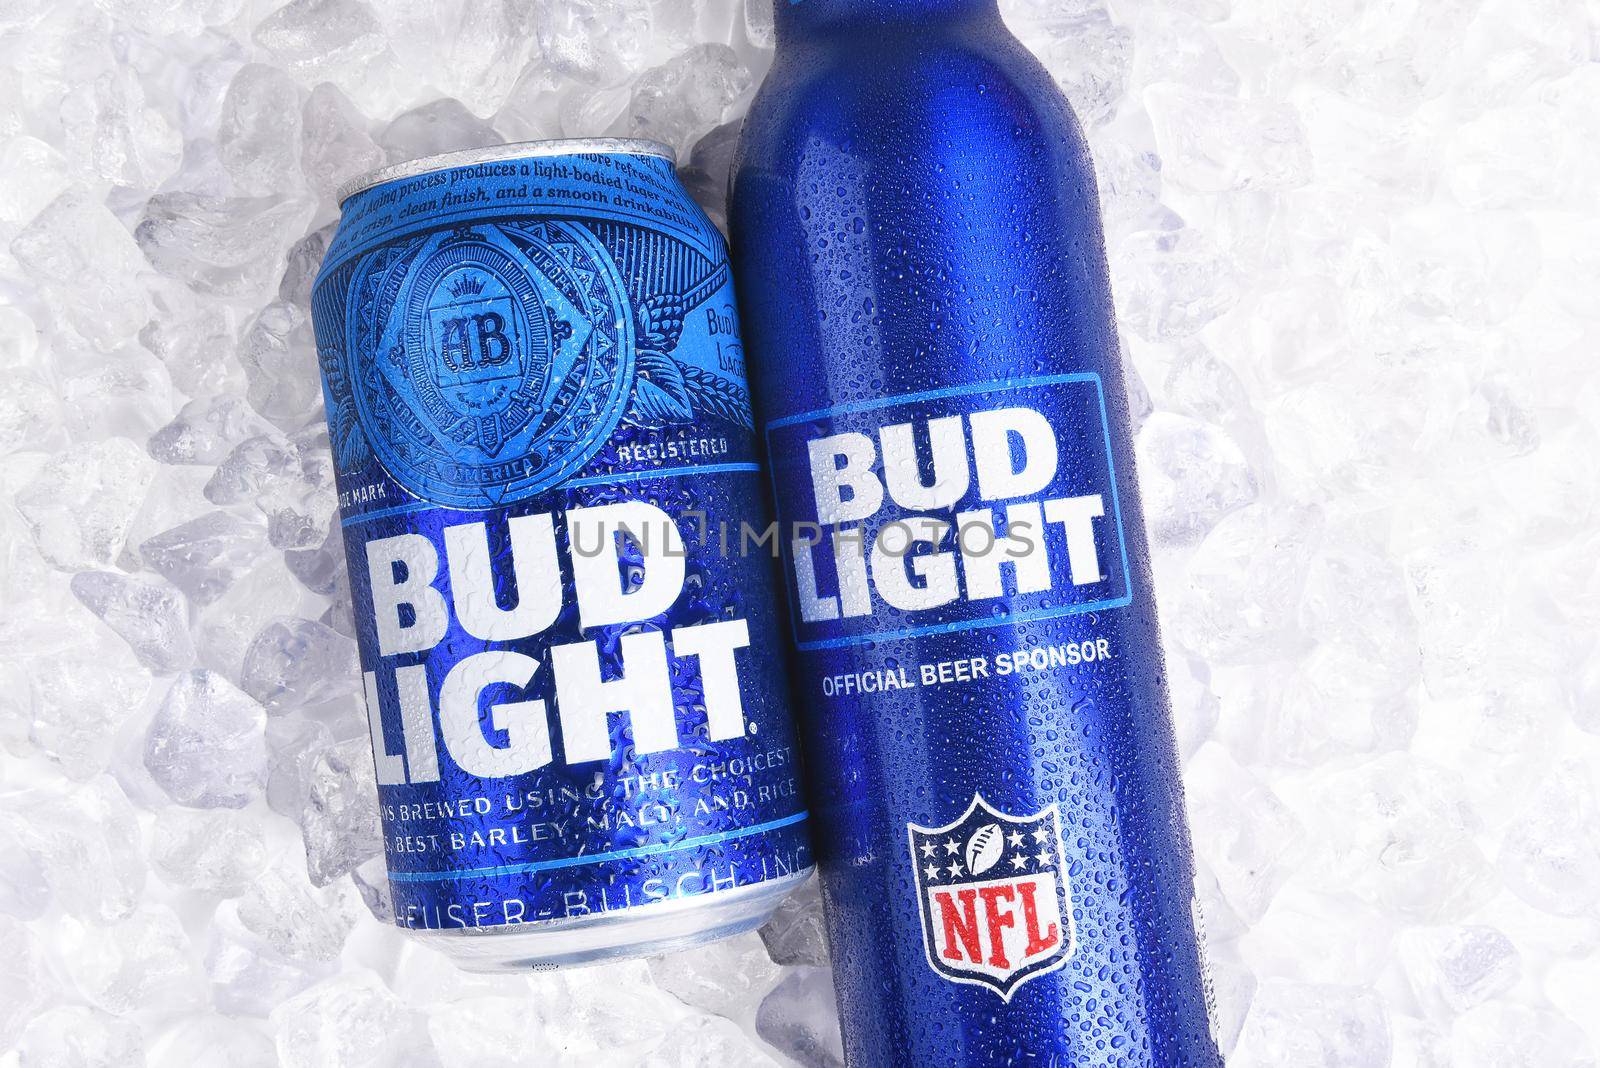 IRVINE, CALIFORNIA - JANUARY 22, 2017: Bud Light Aluminum Bottle and Can on ice. The resealable bottle feature the NFL and Super Bowl LI logos.